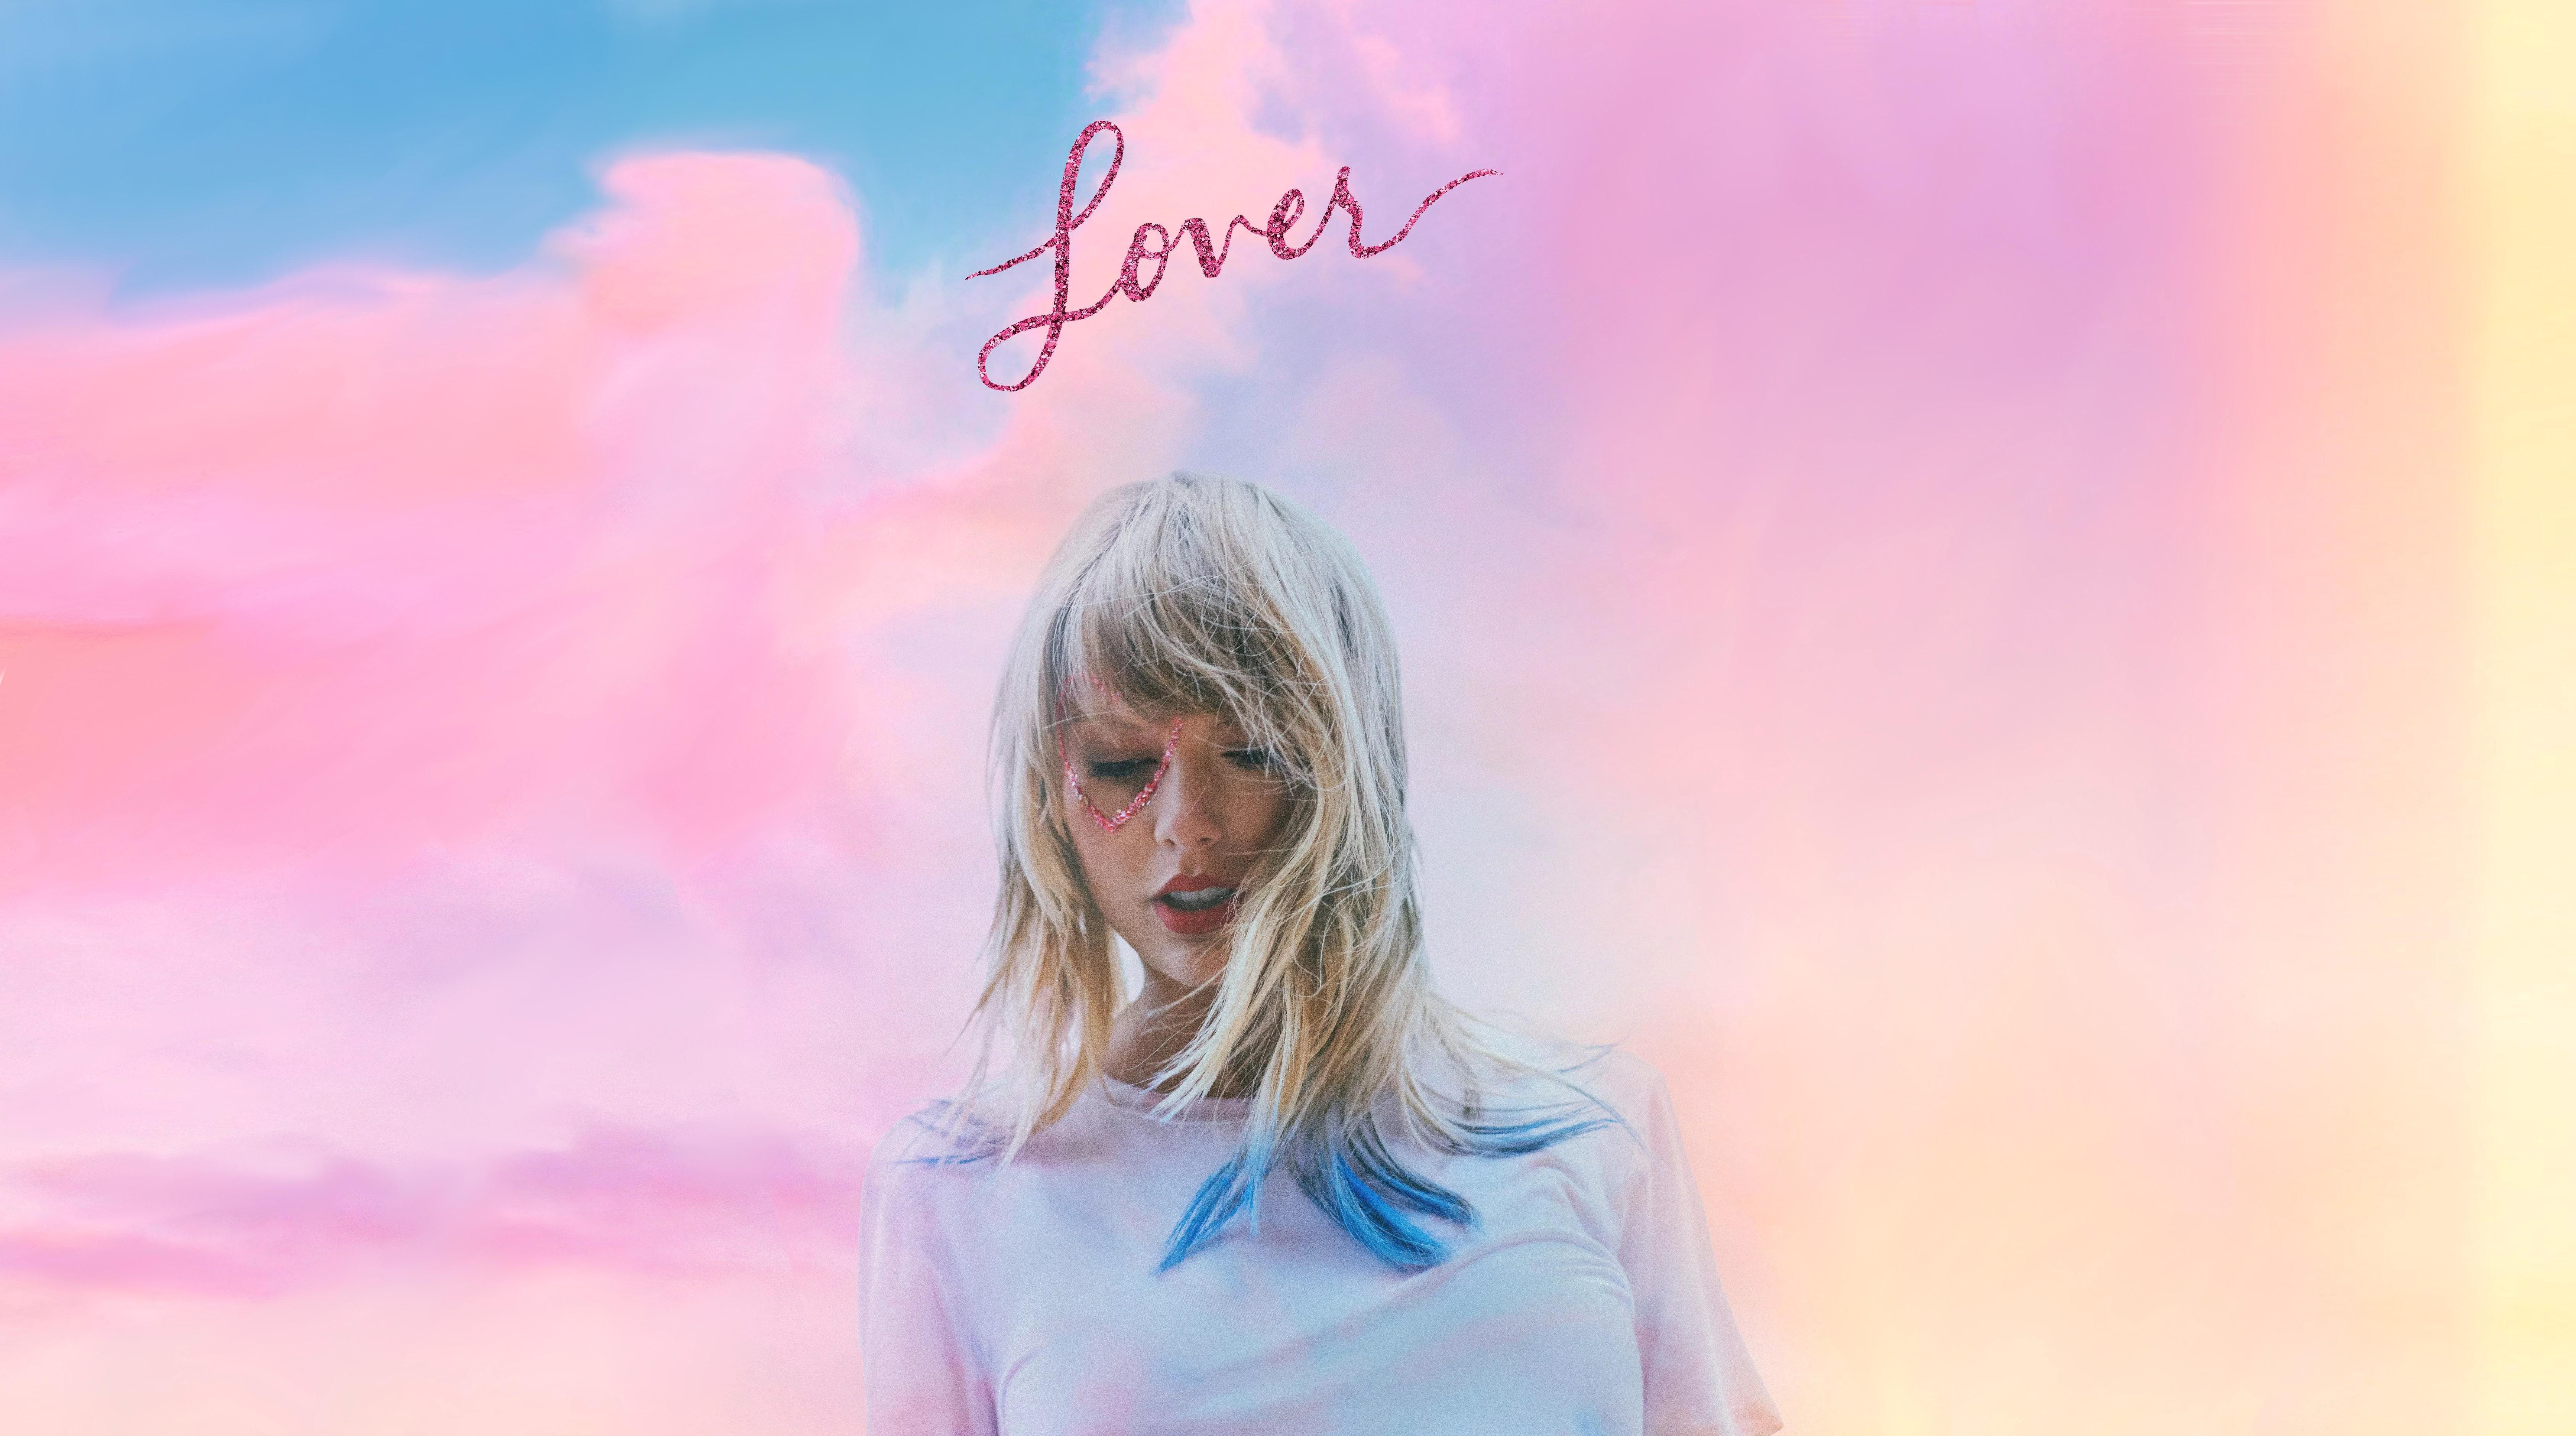 I've Created A High Resolution Desktop Wallpaper Of The Lover